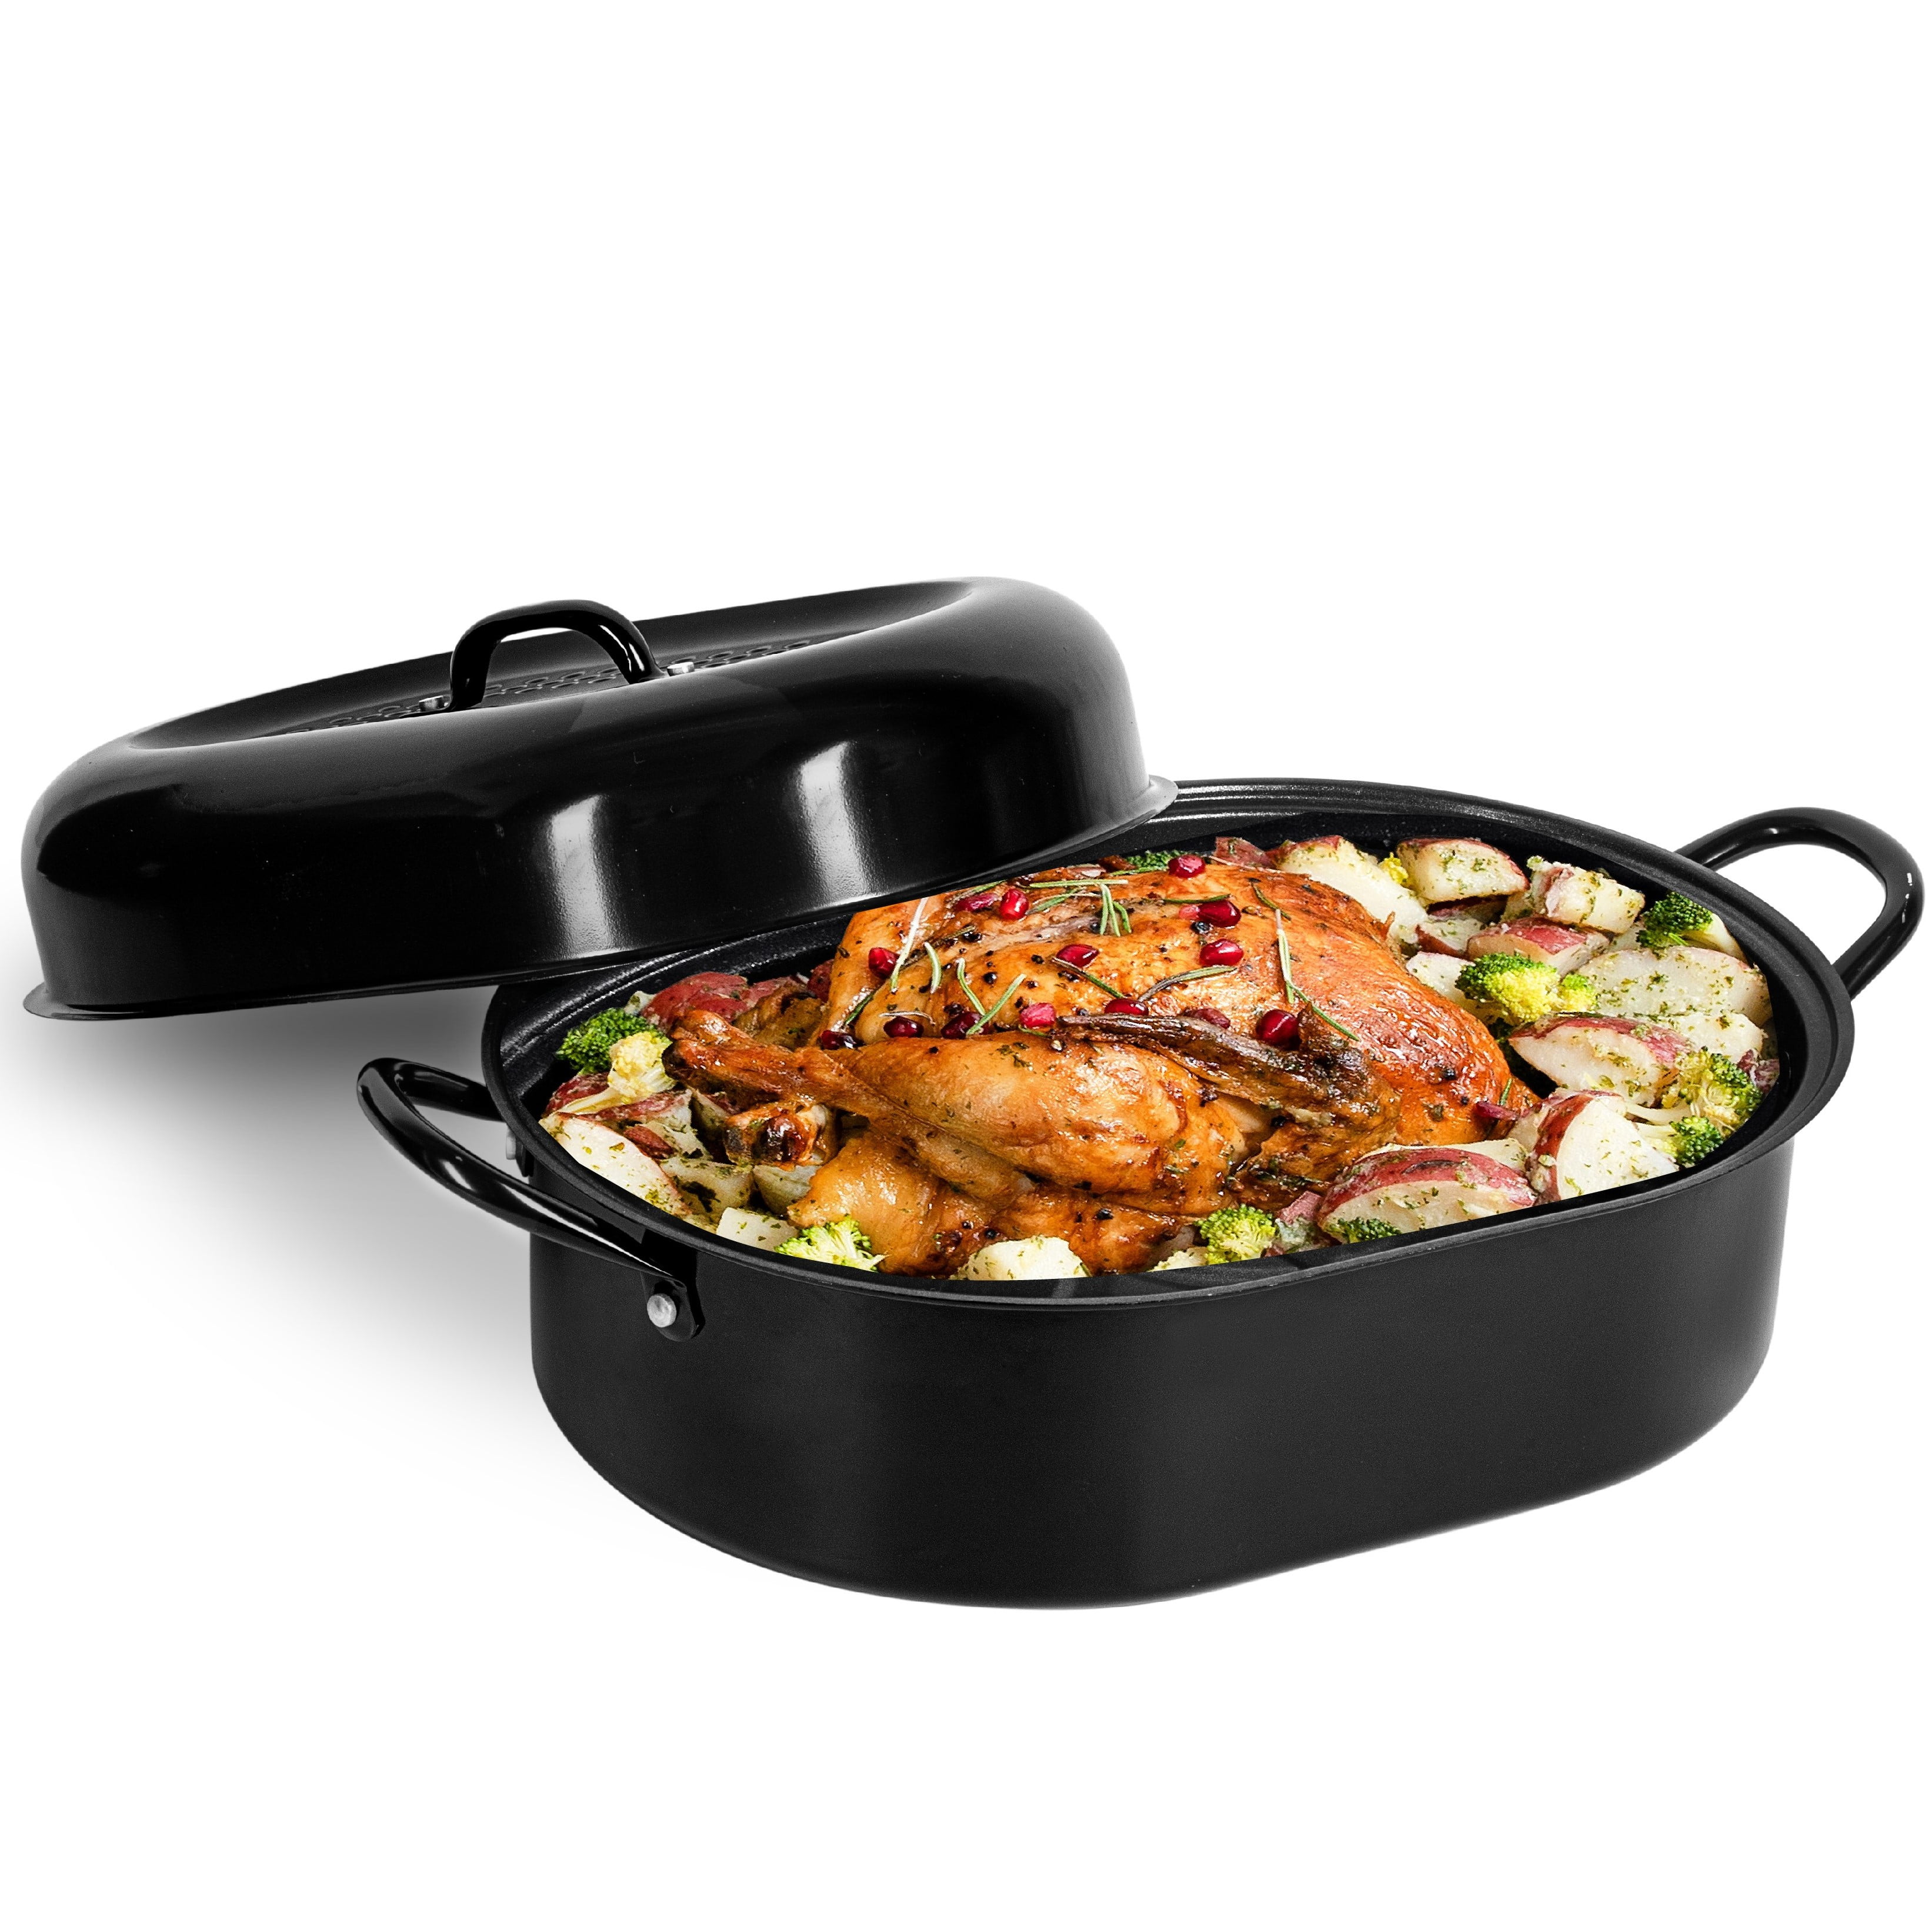 16.5 Stainless Steel Oval Turkey Roaster With Rack & Lid – R & B Import